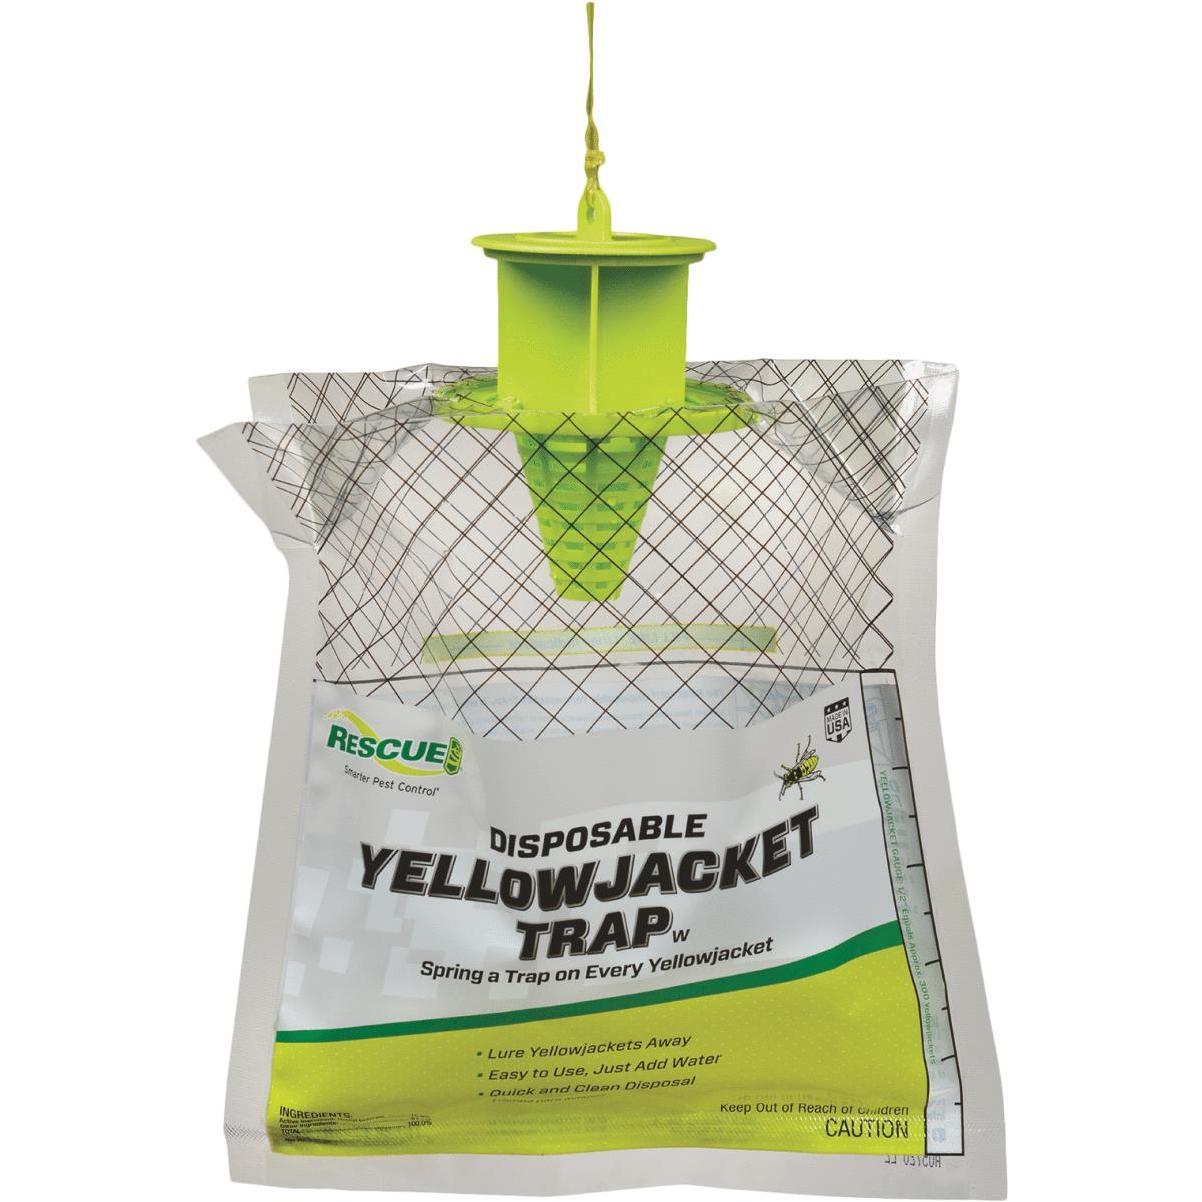 victor yellow jacket magnet disposable yellow jacket trap Near Me